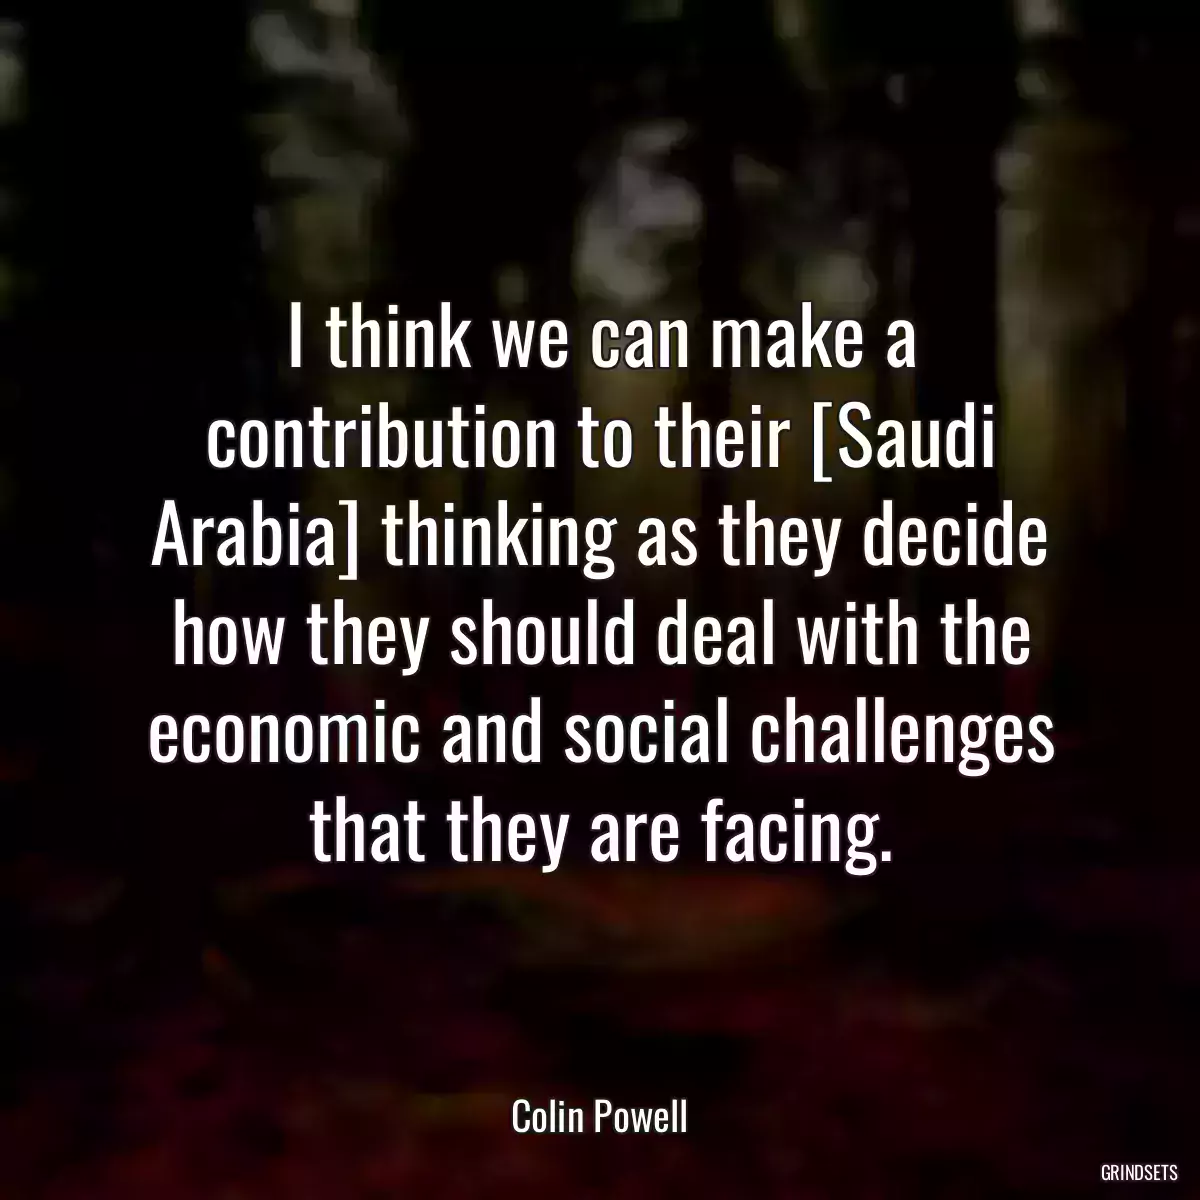 I think we can make a contribution to their [Saudi Arabia] thinking as they decide how they should deal with the economic and social challenges that they are facing.